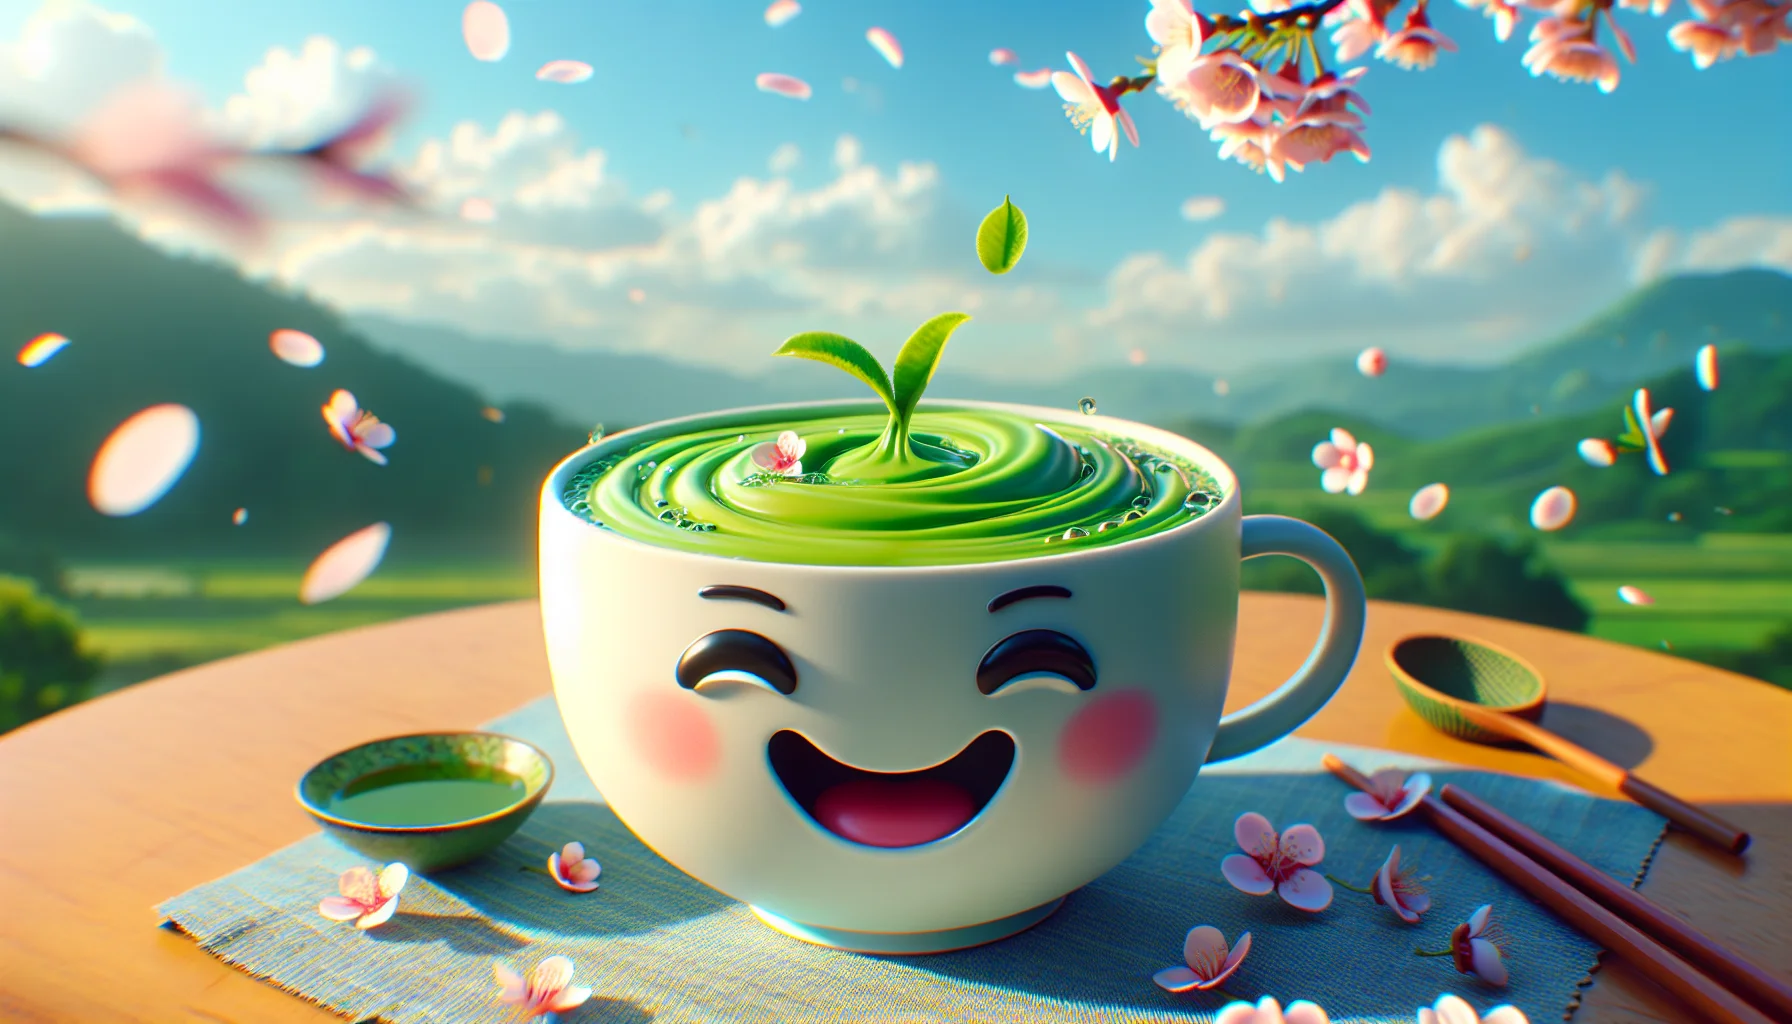 Render a humorous scenario that originates from Japan, featuring a cup of green tea. Depict a smiling Japanese tea cup looking enticing, as if inviting people to enjoy its warmth. The scene is peaceful and joyful; cherry blossoms are floating in the background, and perhaps a gust of wind has made the tea ripple in the cup. Render the colors naturally but with an emphasis on the vibrant green of the tea, eliciting a sense of freshness and health.